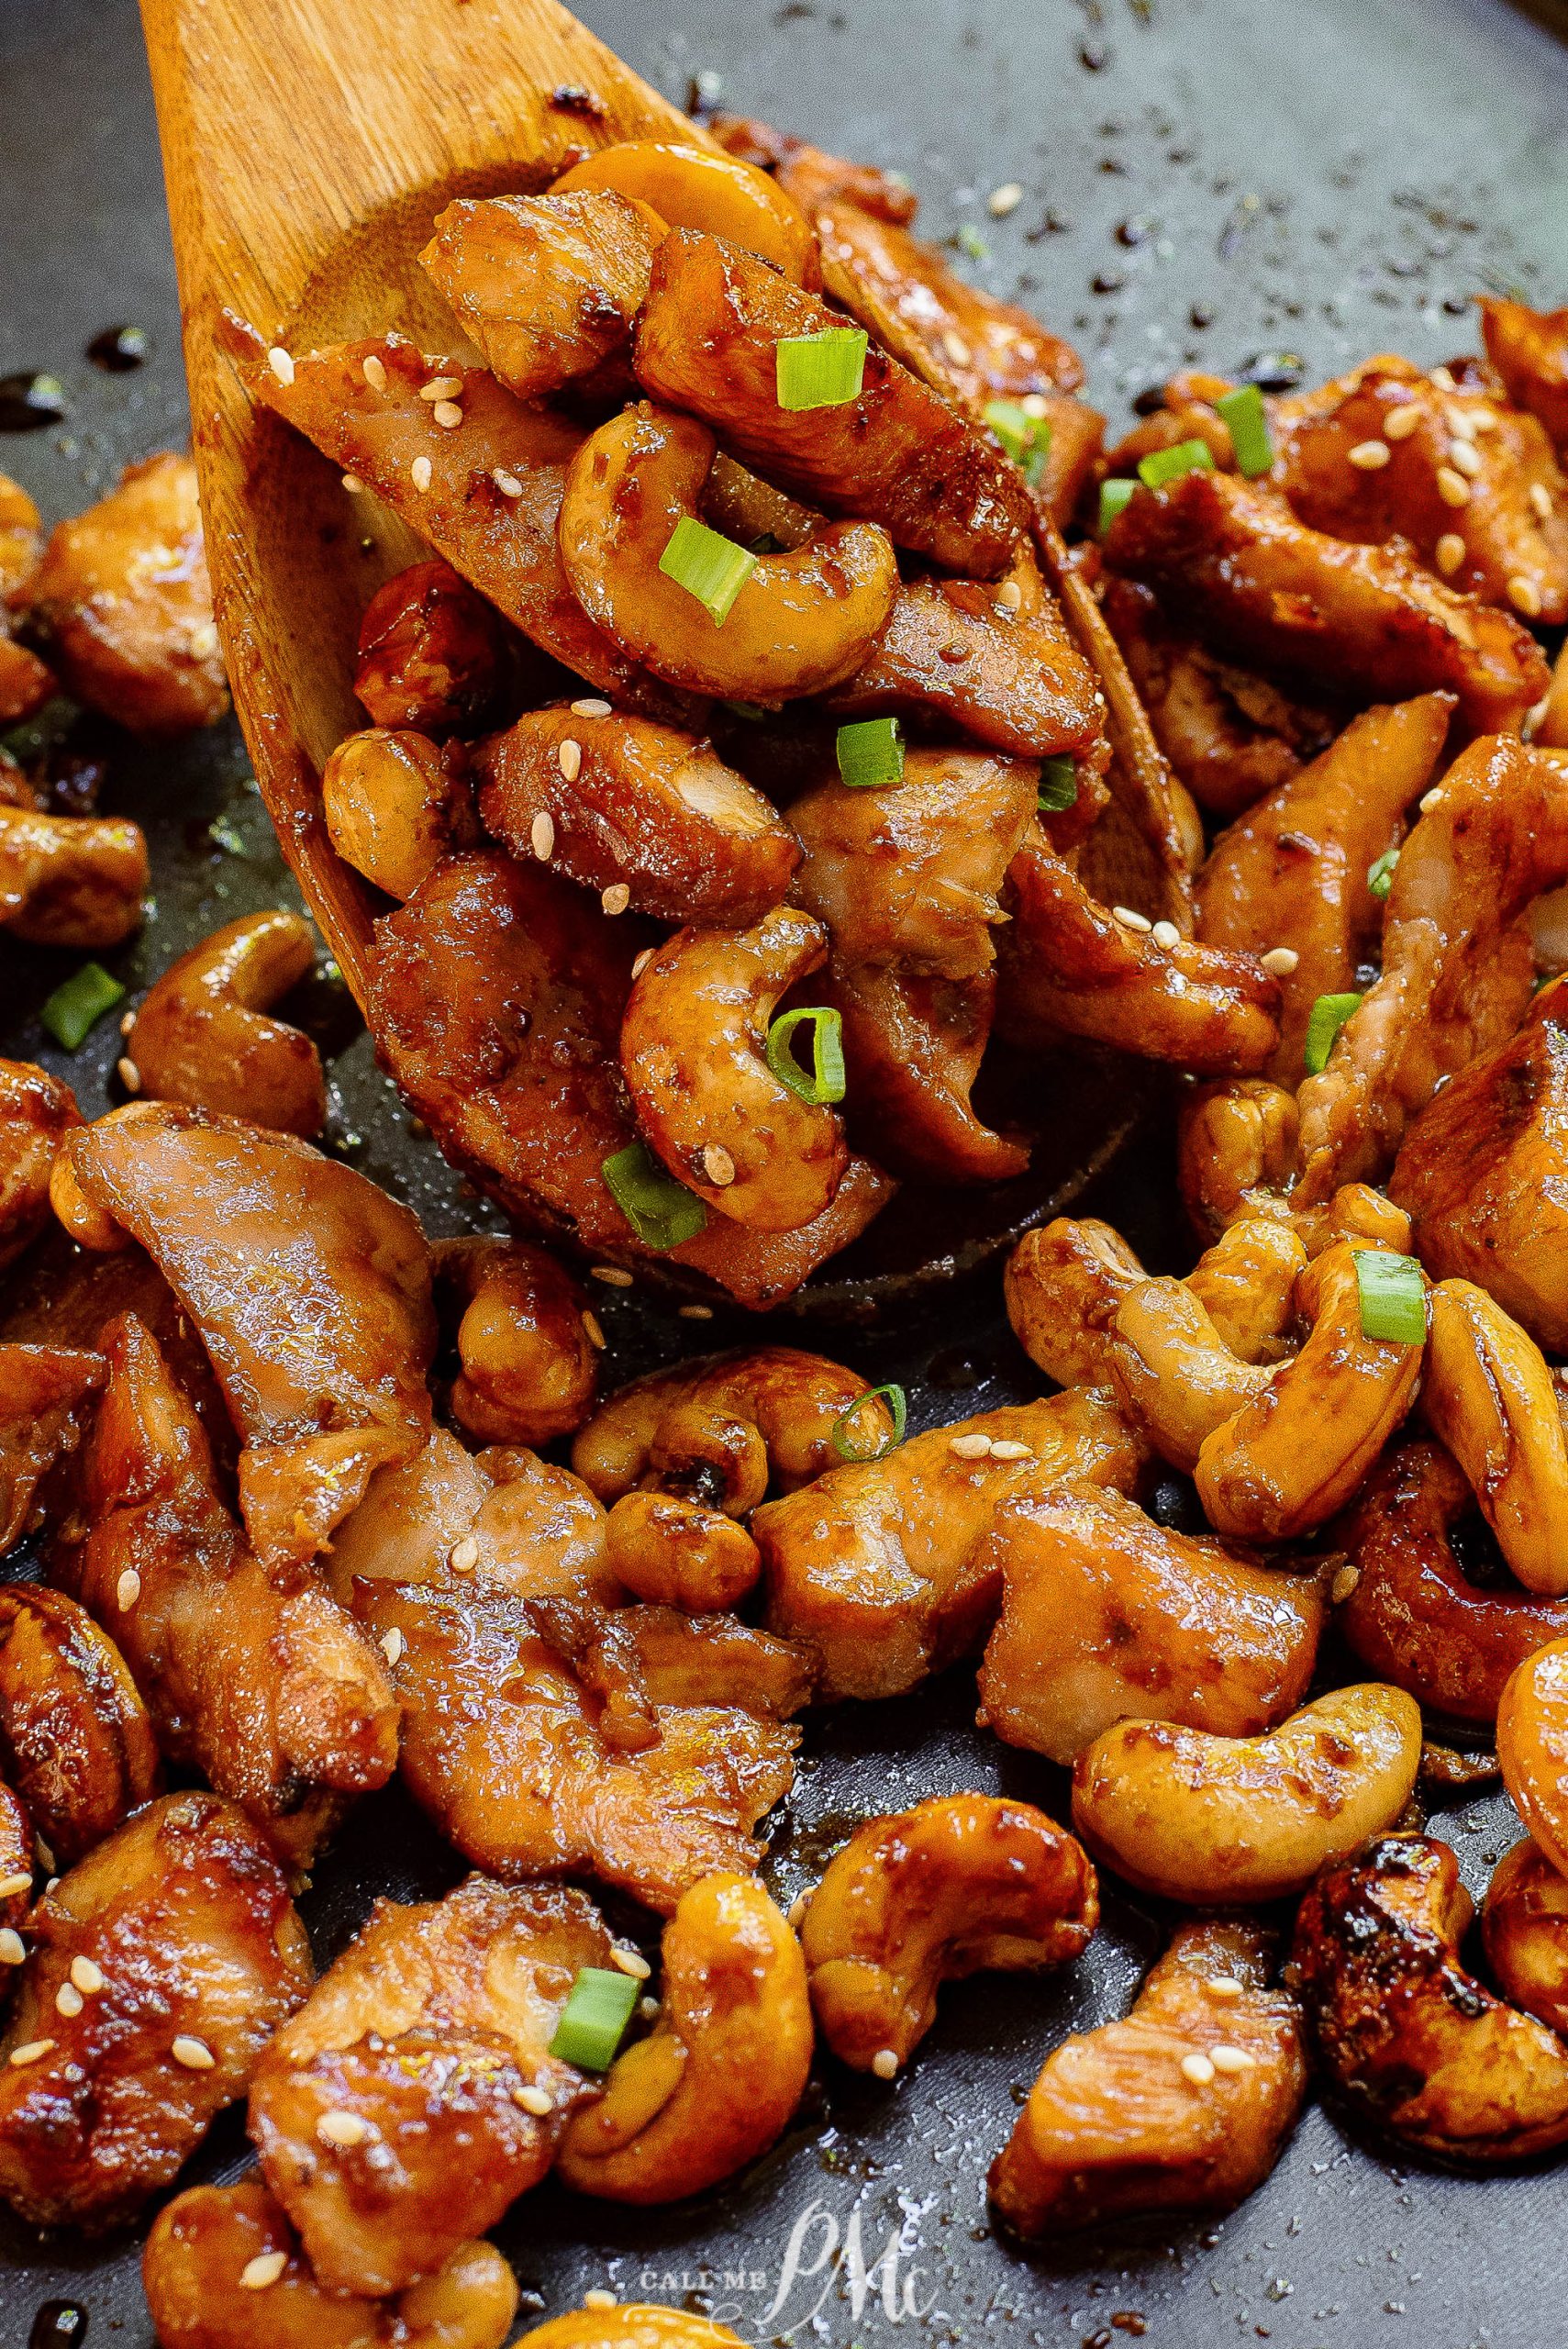 https://www.callmepmc.com/wp-content/uploads/2023/09/Exclusive-Sheet-Pan-Honey-Soy-Chicken-with-Cashew-Nuts-8014-9-scaled.jpg